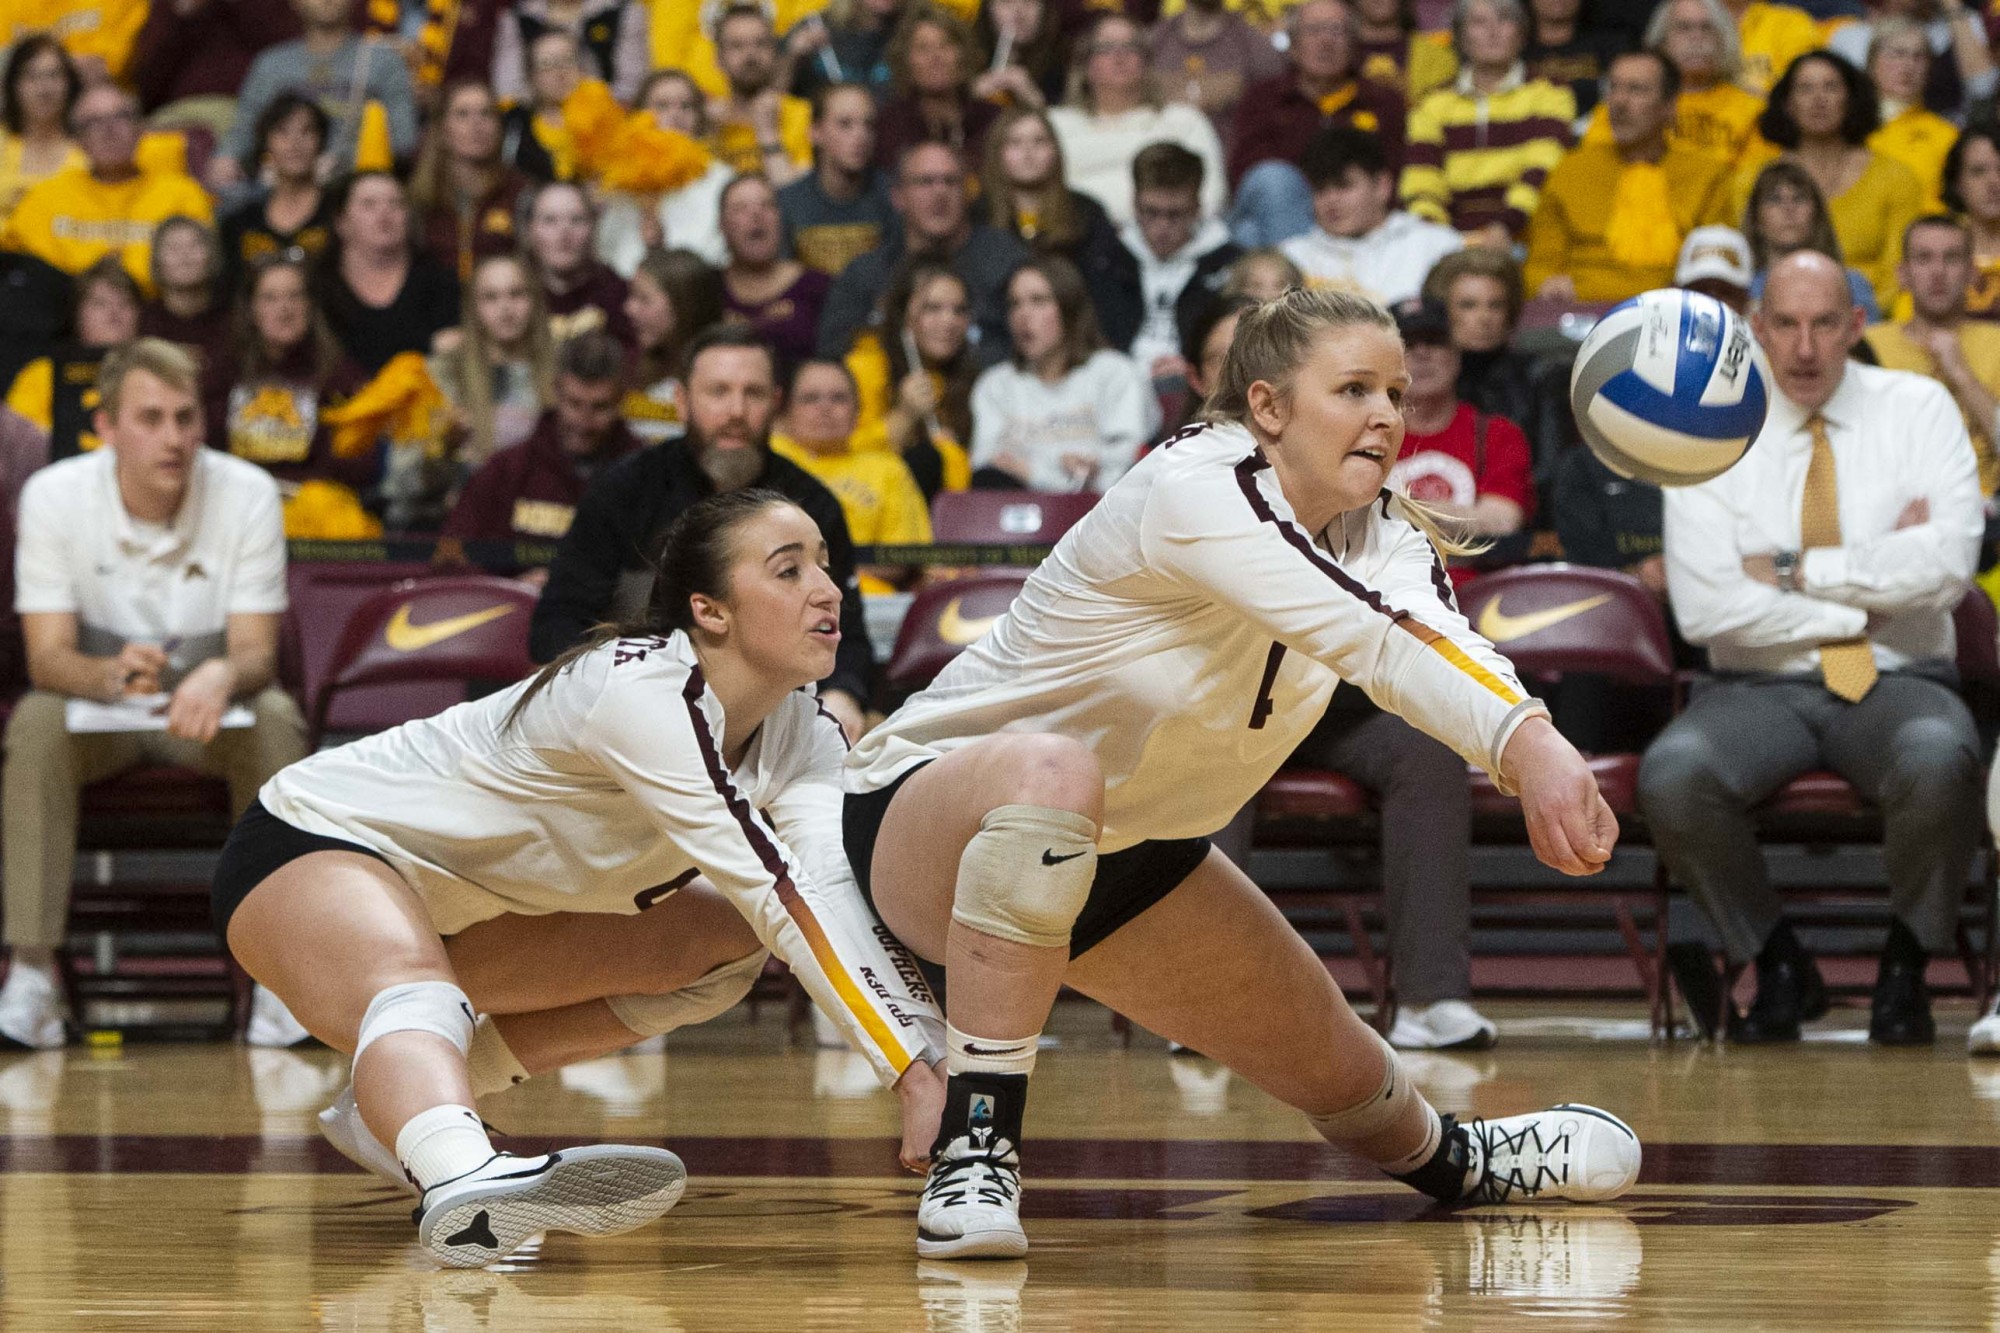 Libero Rachel Kilkelly and Outside Hitter Claire Sheehan dive for the ball at the Maturi Pavilion on Friday, Nov. 22. The Gophers took Nebraska to five sets but ultimately fell 3-2. 